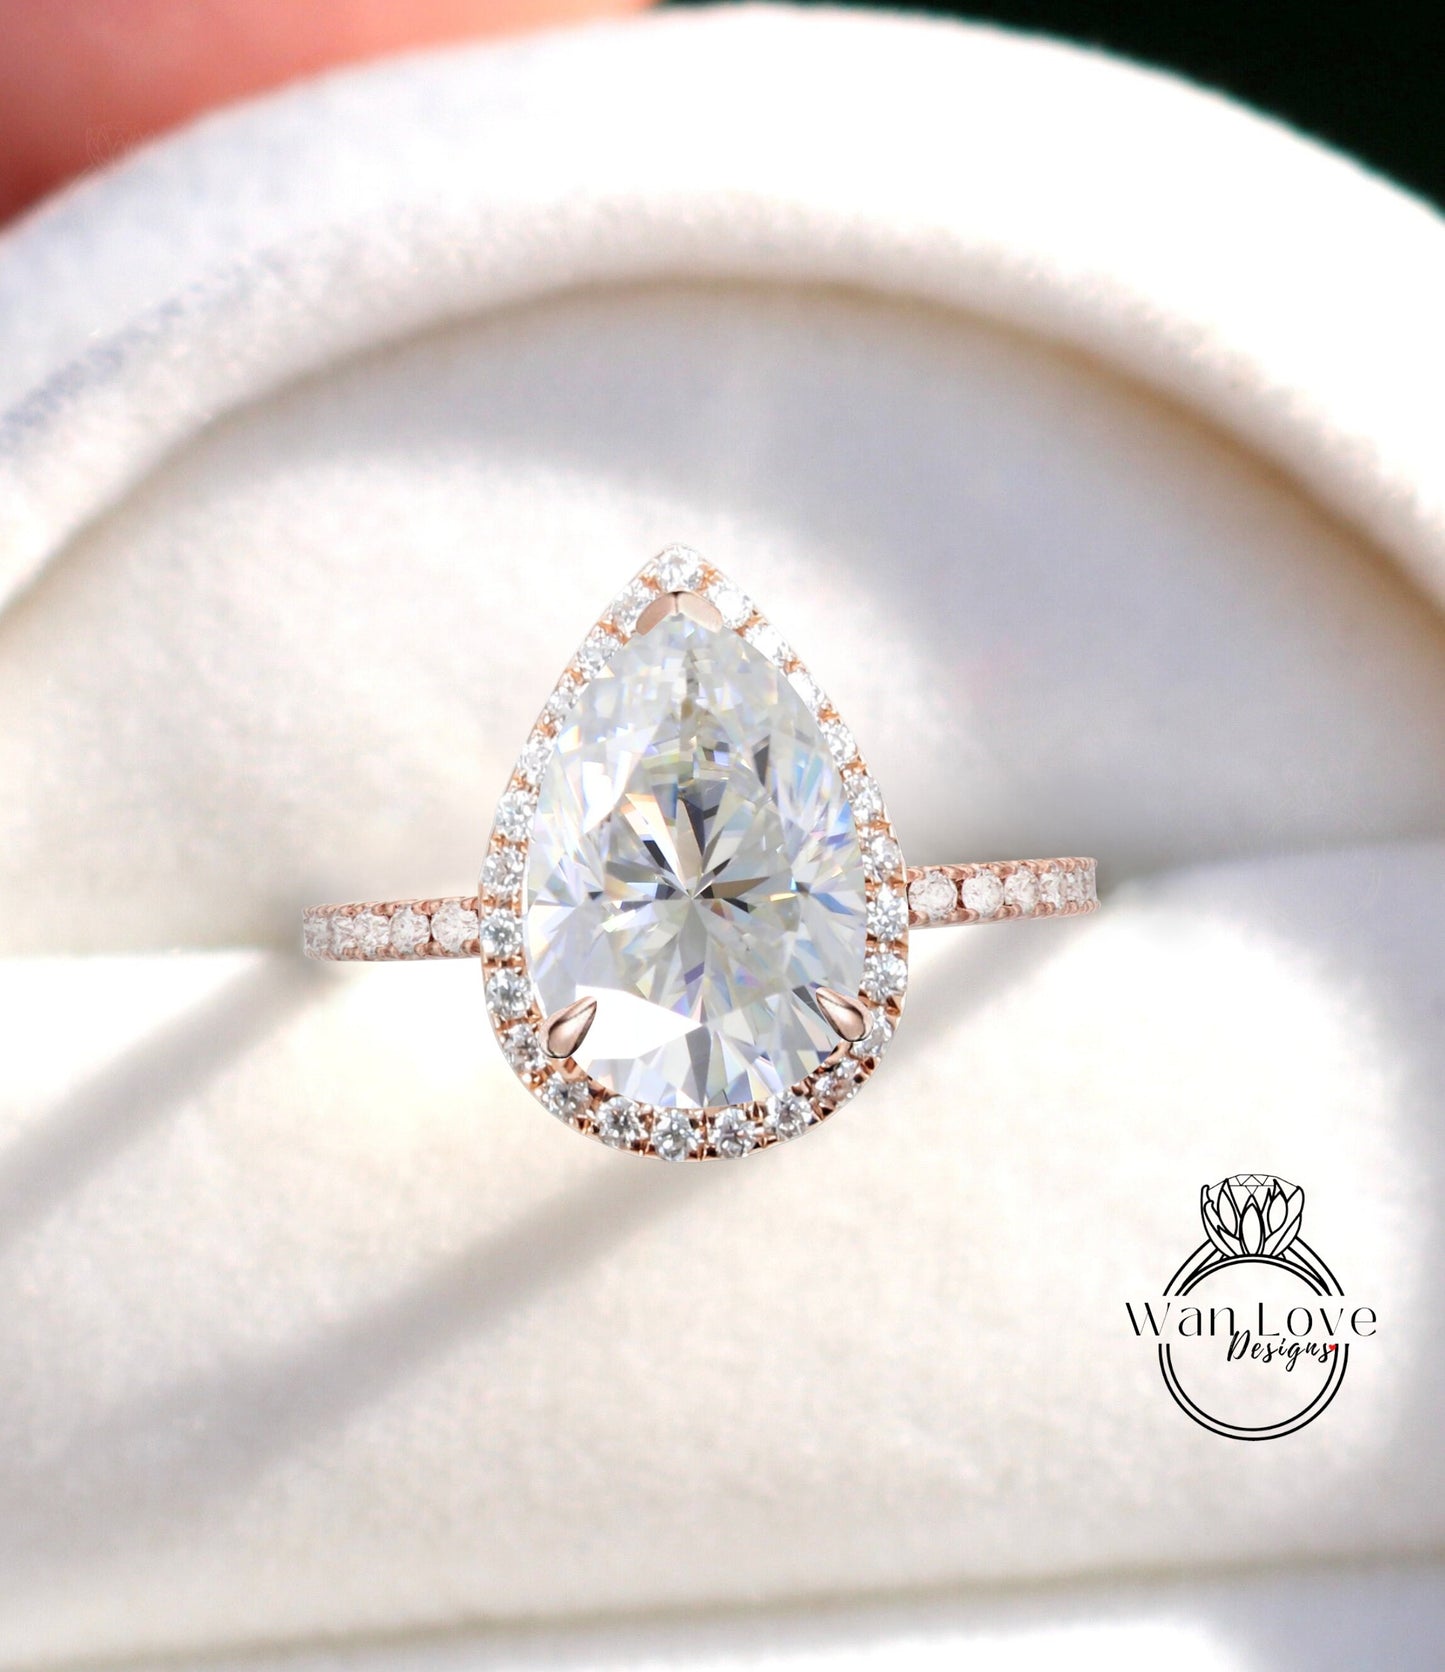 Vintage Moissanite Pear shaped Engagement Ring, Pear Cut Unique 14k Rose Gold Diamond Halo Ring, Wedding Ring Anniversary Ring Proposal Ring